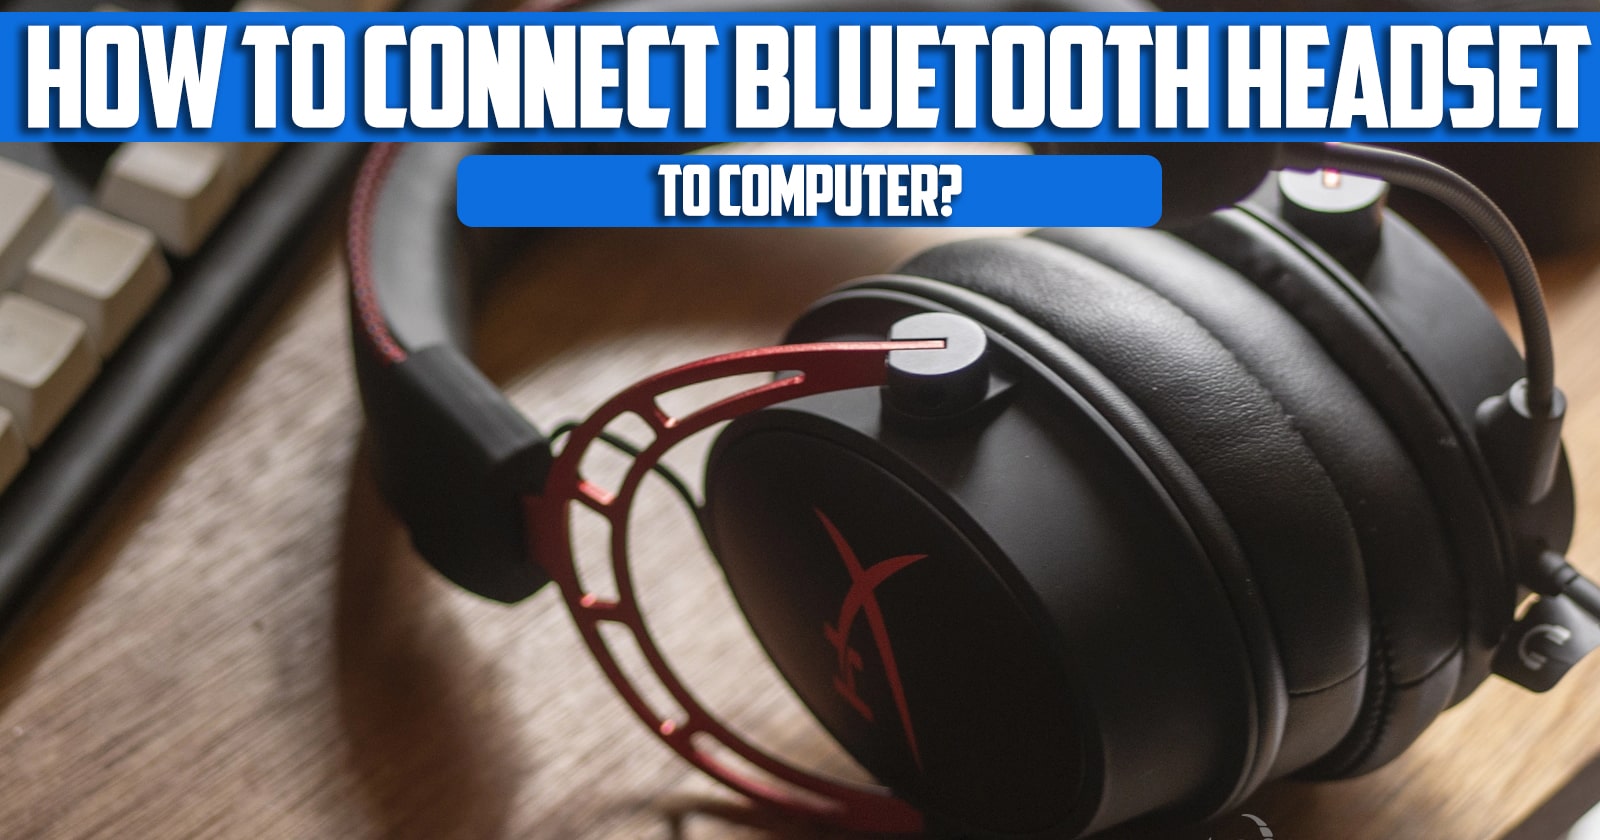 How to connect Bluetooth headset to computer